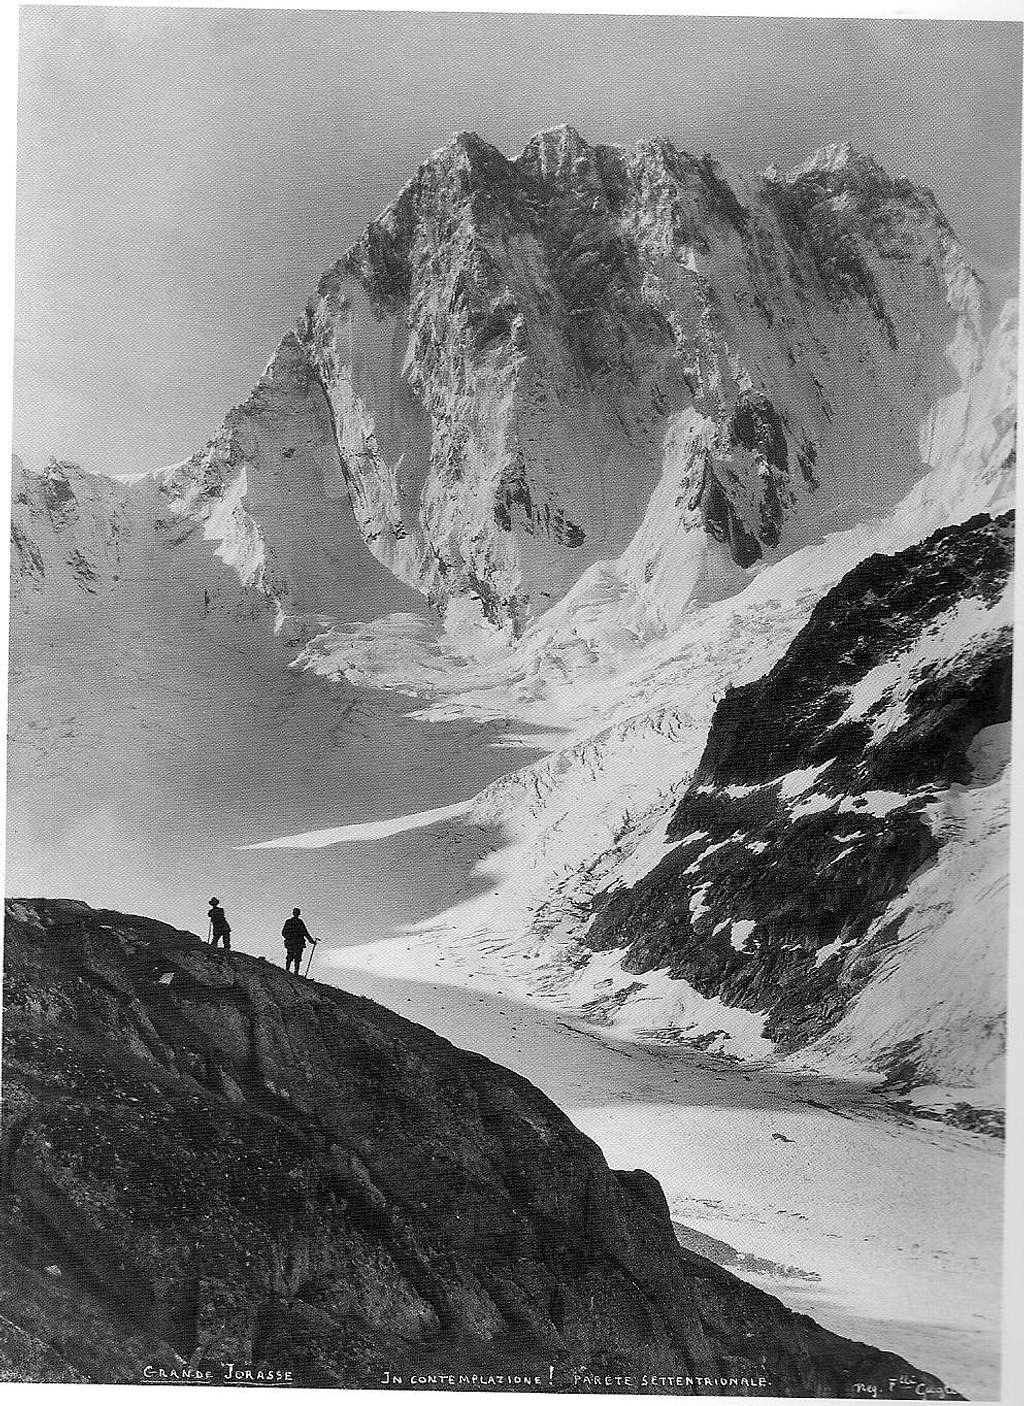 North Face in 1920 - the Gugliermina Picture